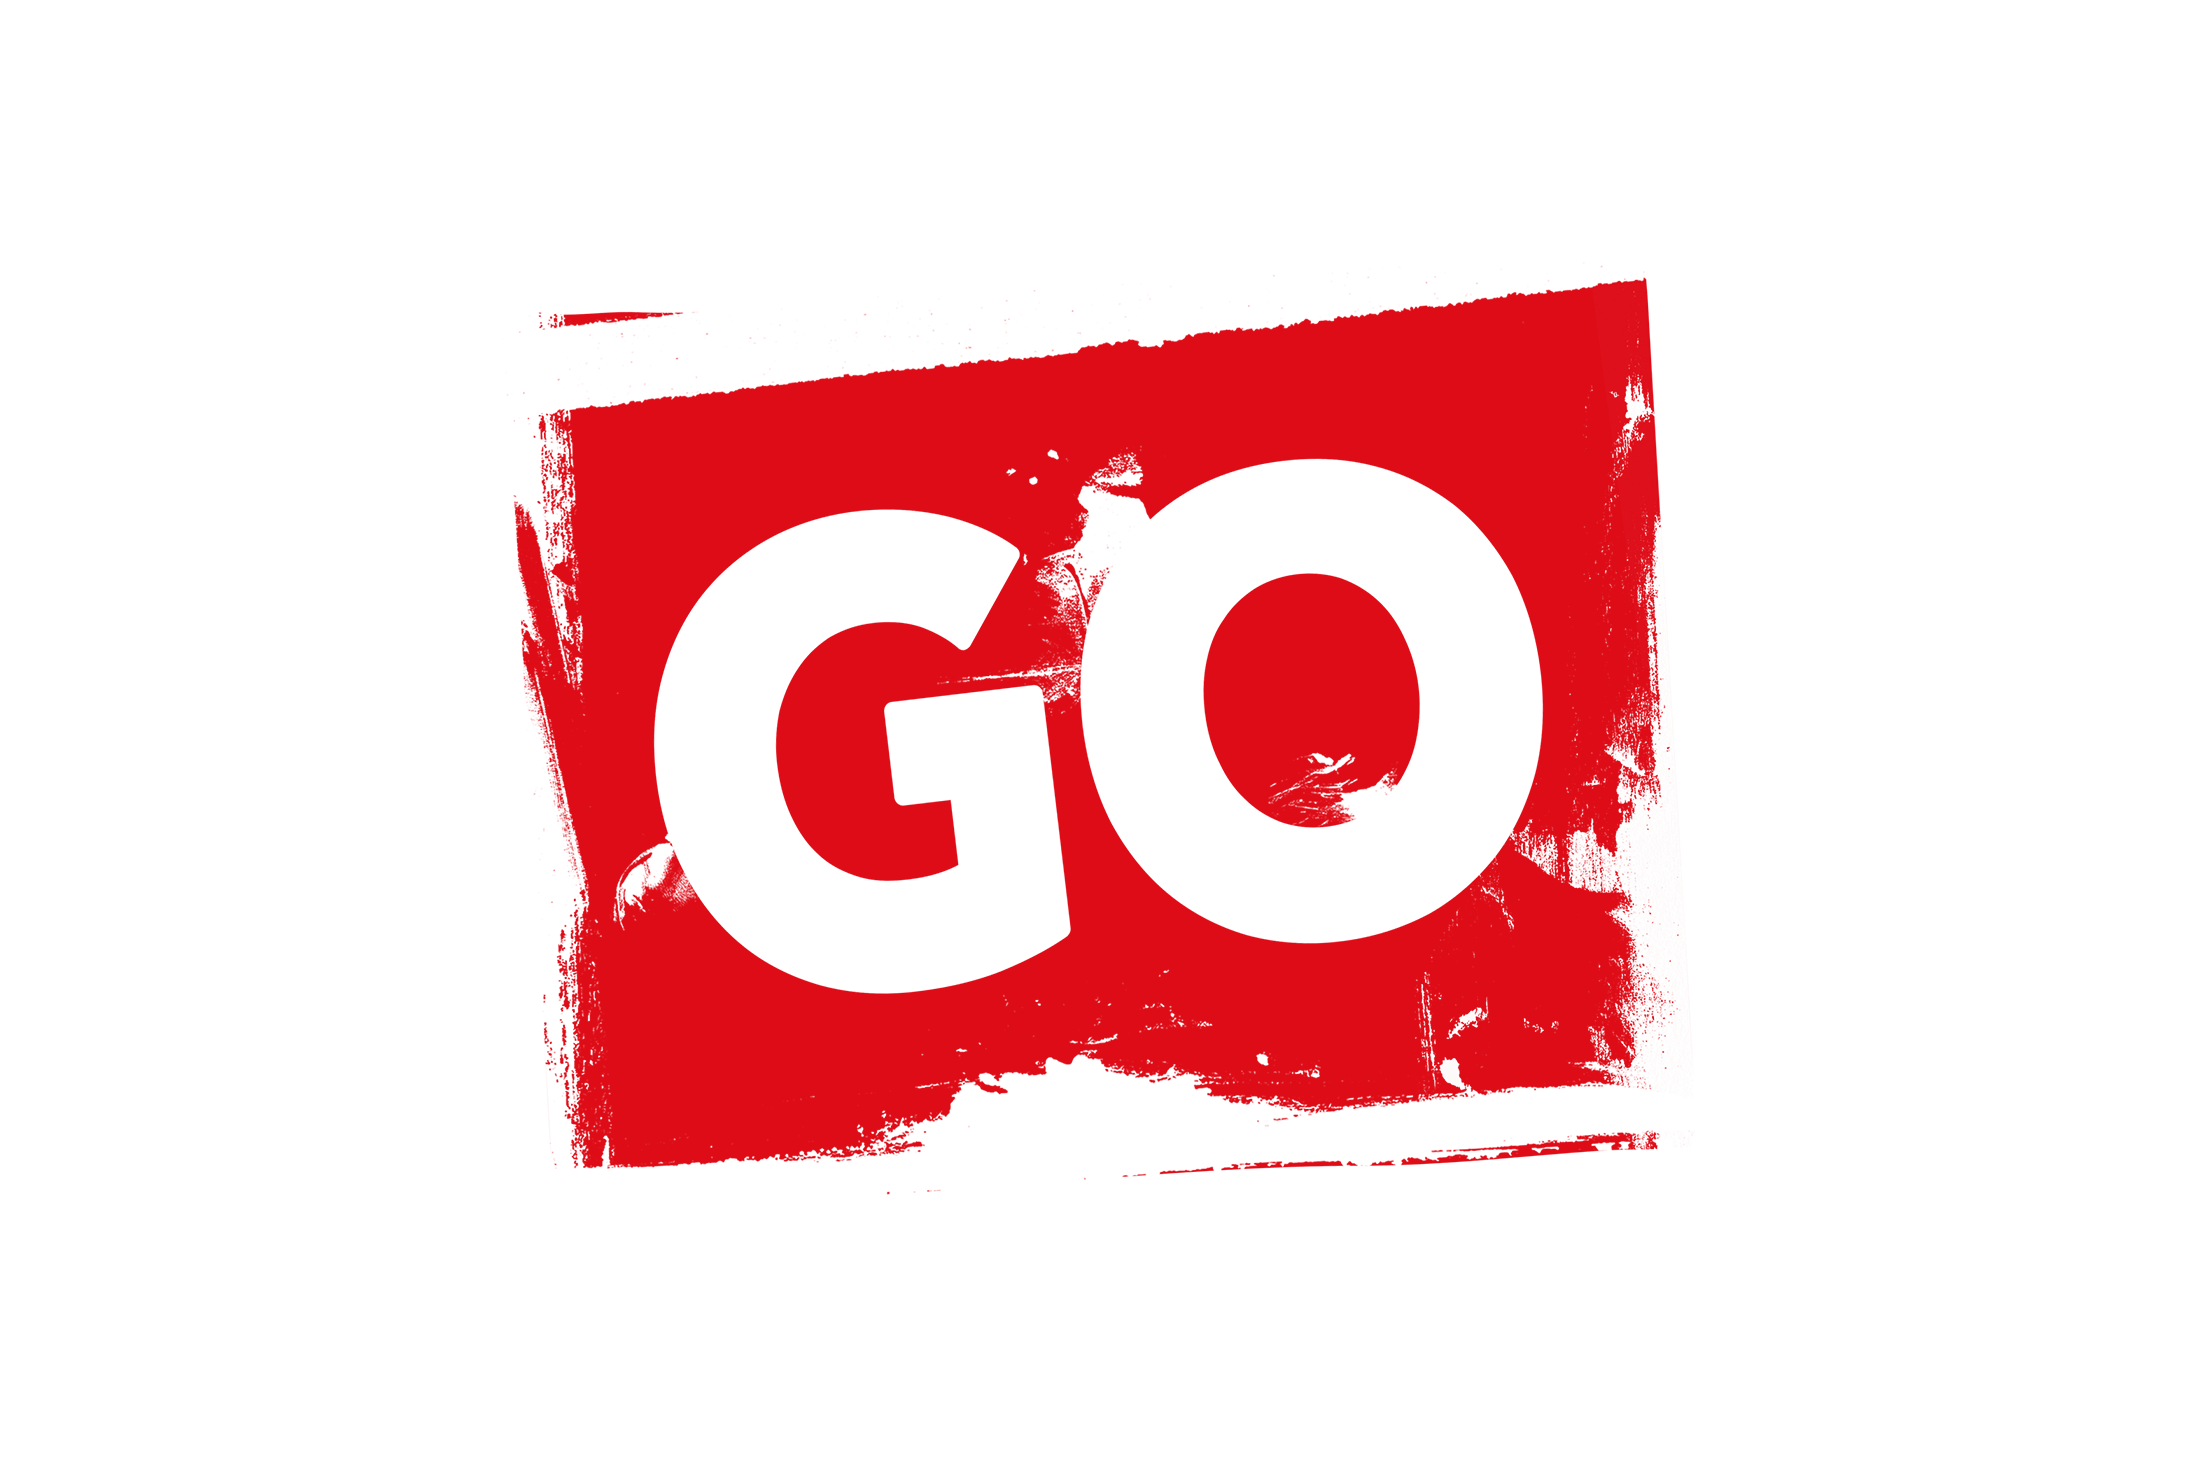 Grunge go label PNG and PSD